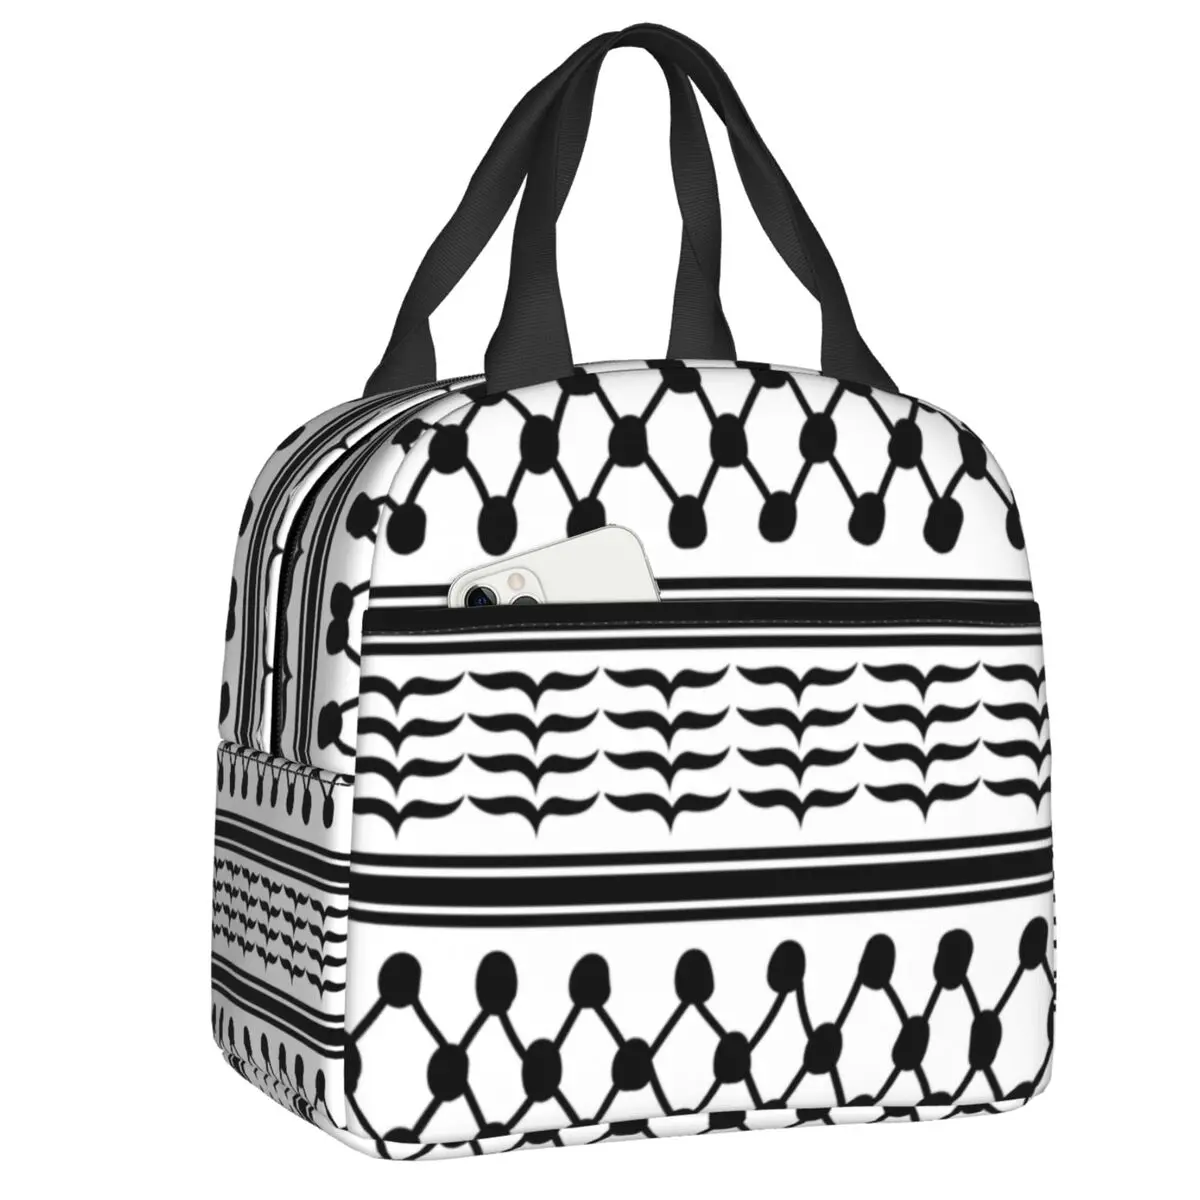 Palestinian Kufeya Insulated Lunch Tote Bag for Women Palestine Keffiyeh Embroidery Portable Thermal Cooler Bento Box School